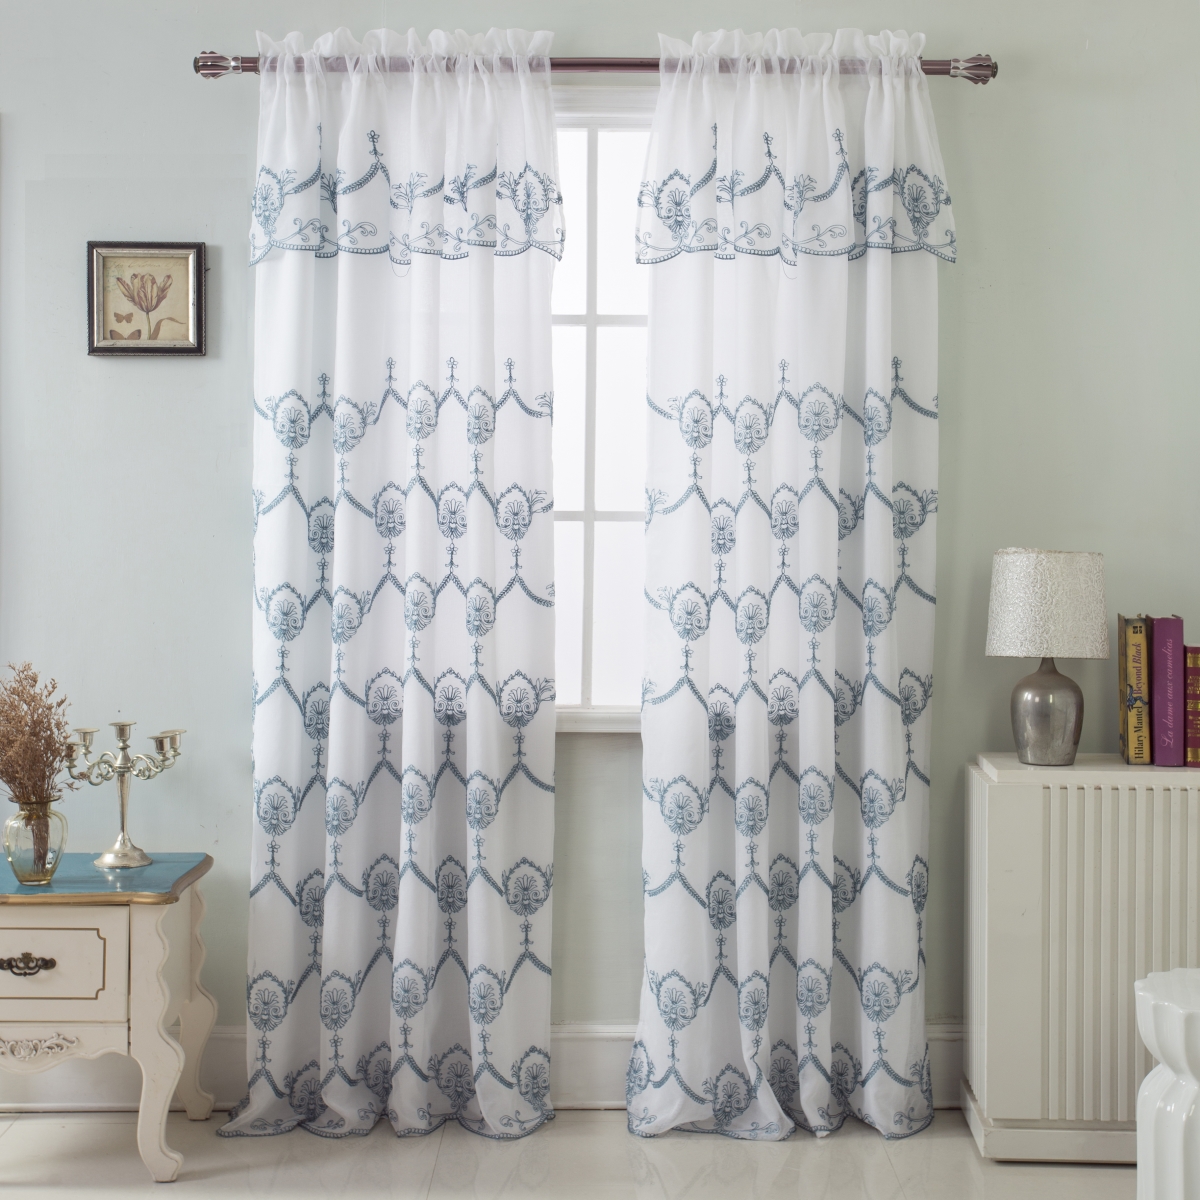 Pnr17008 54 X 84 In. Rochelle Embroidered. Satin Layered Rod Pocket Single Curtain Panel With Attached 18 In. Valance, Blue